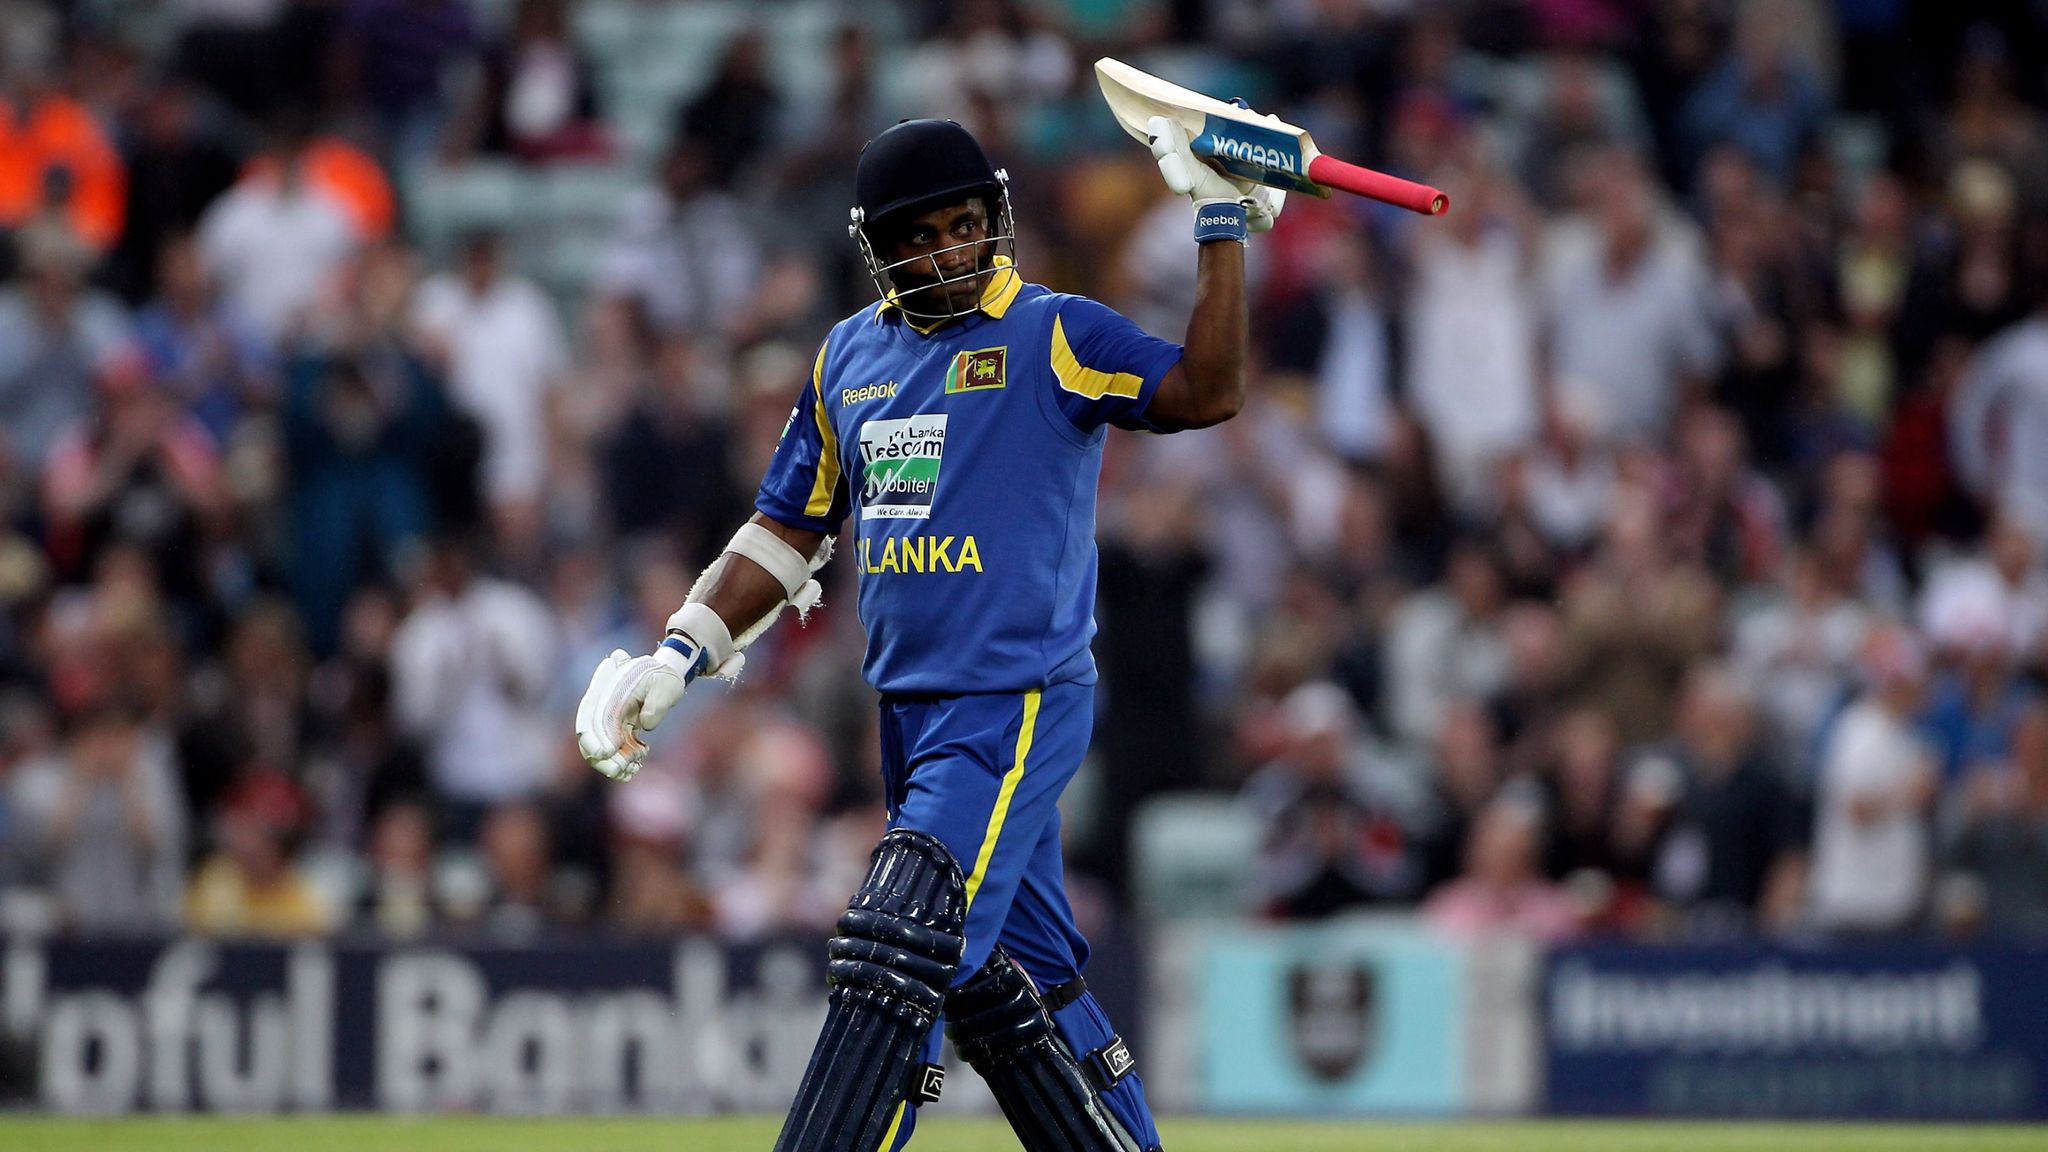 Sanath Jayasuriya banned from cricket for two years by ICC | Cricket News | Sky Sports